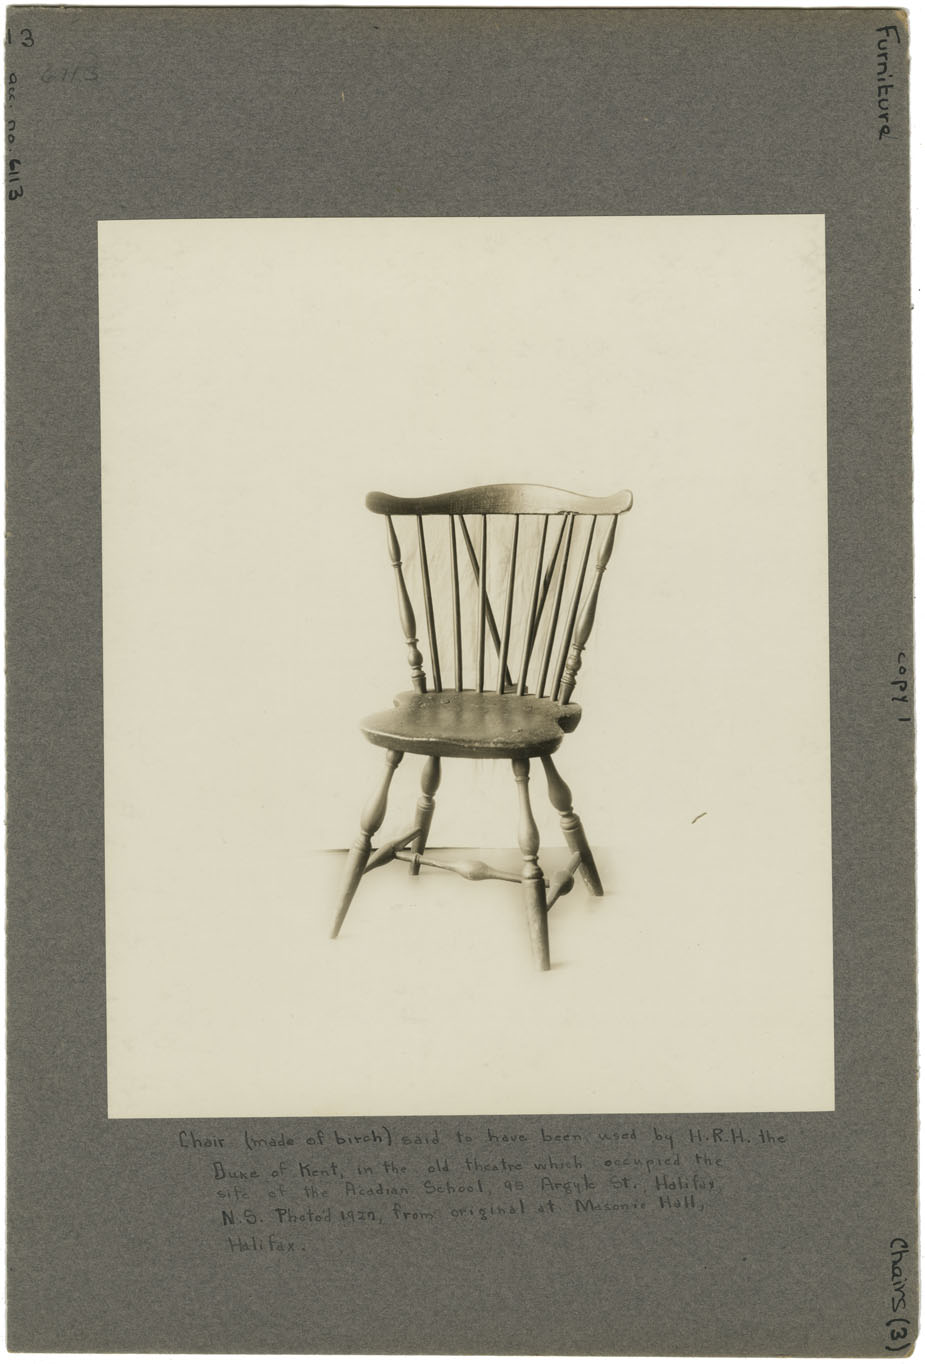 photocollection : Furniture: Chairs: Chair made of birch said to have been used by HRH the Duke of Kent in the old theatre which occupied the site of the Acad